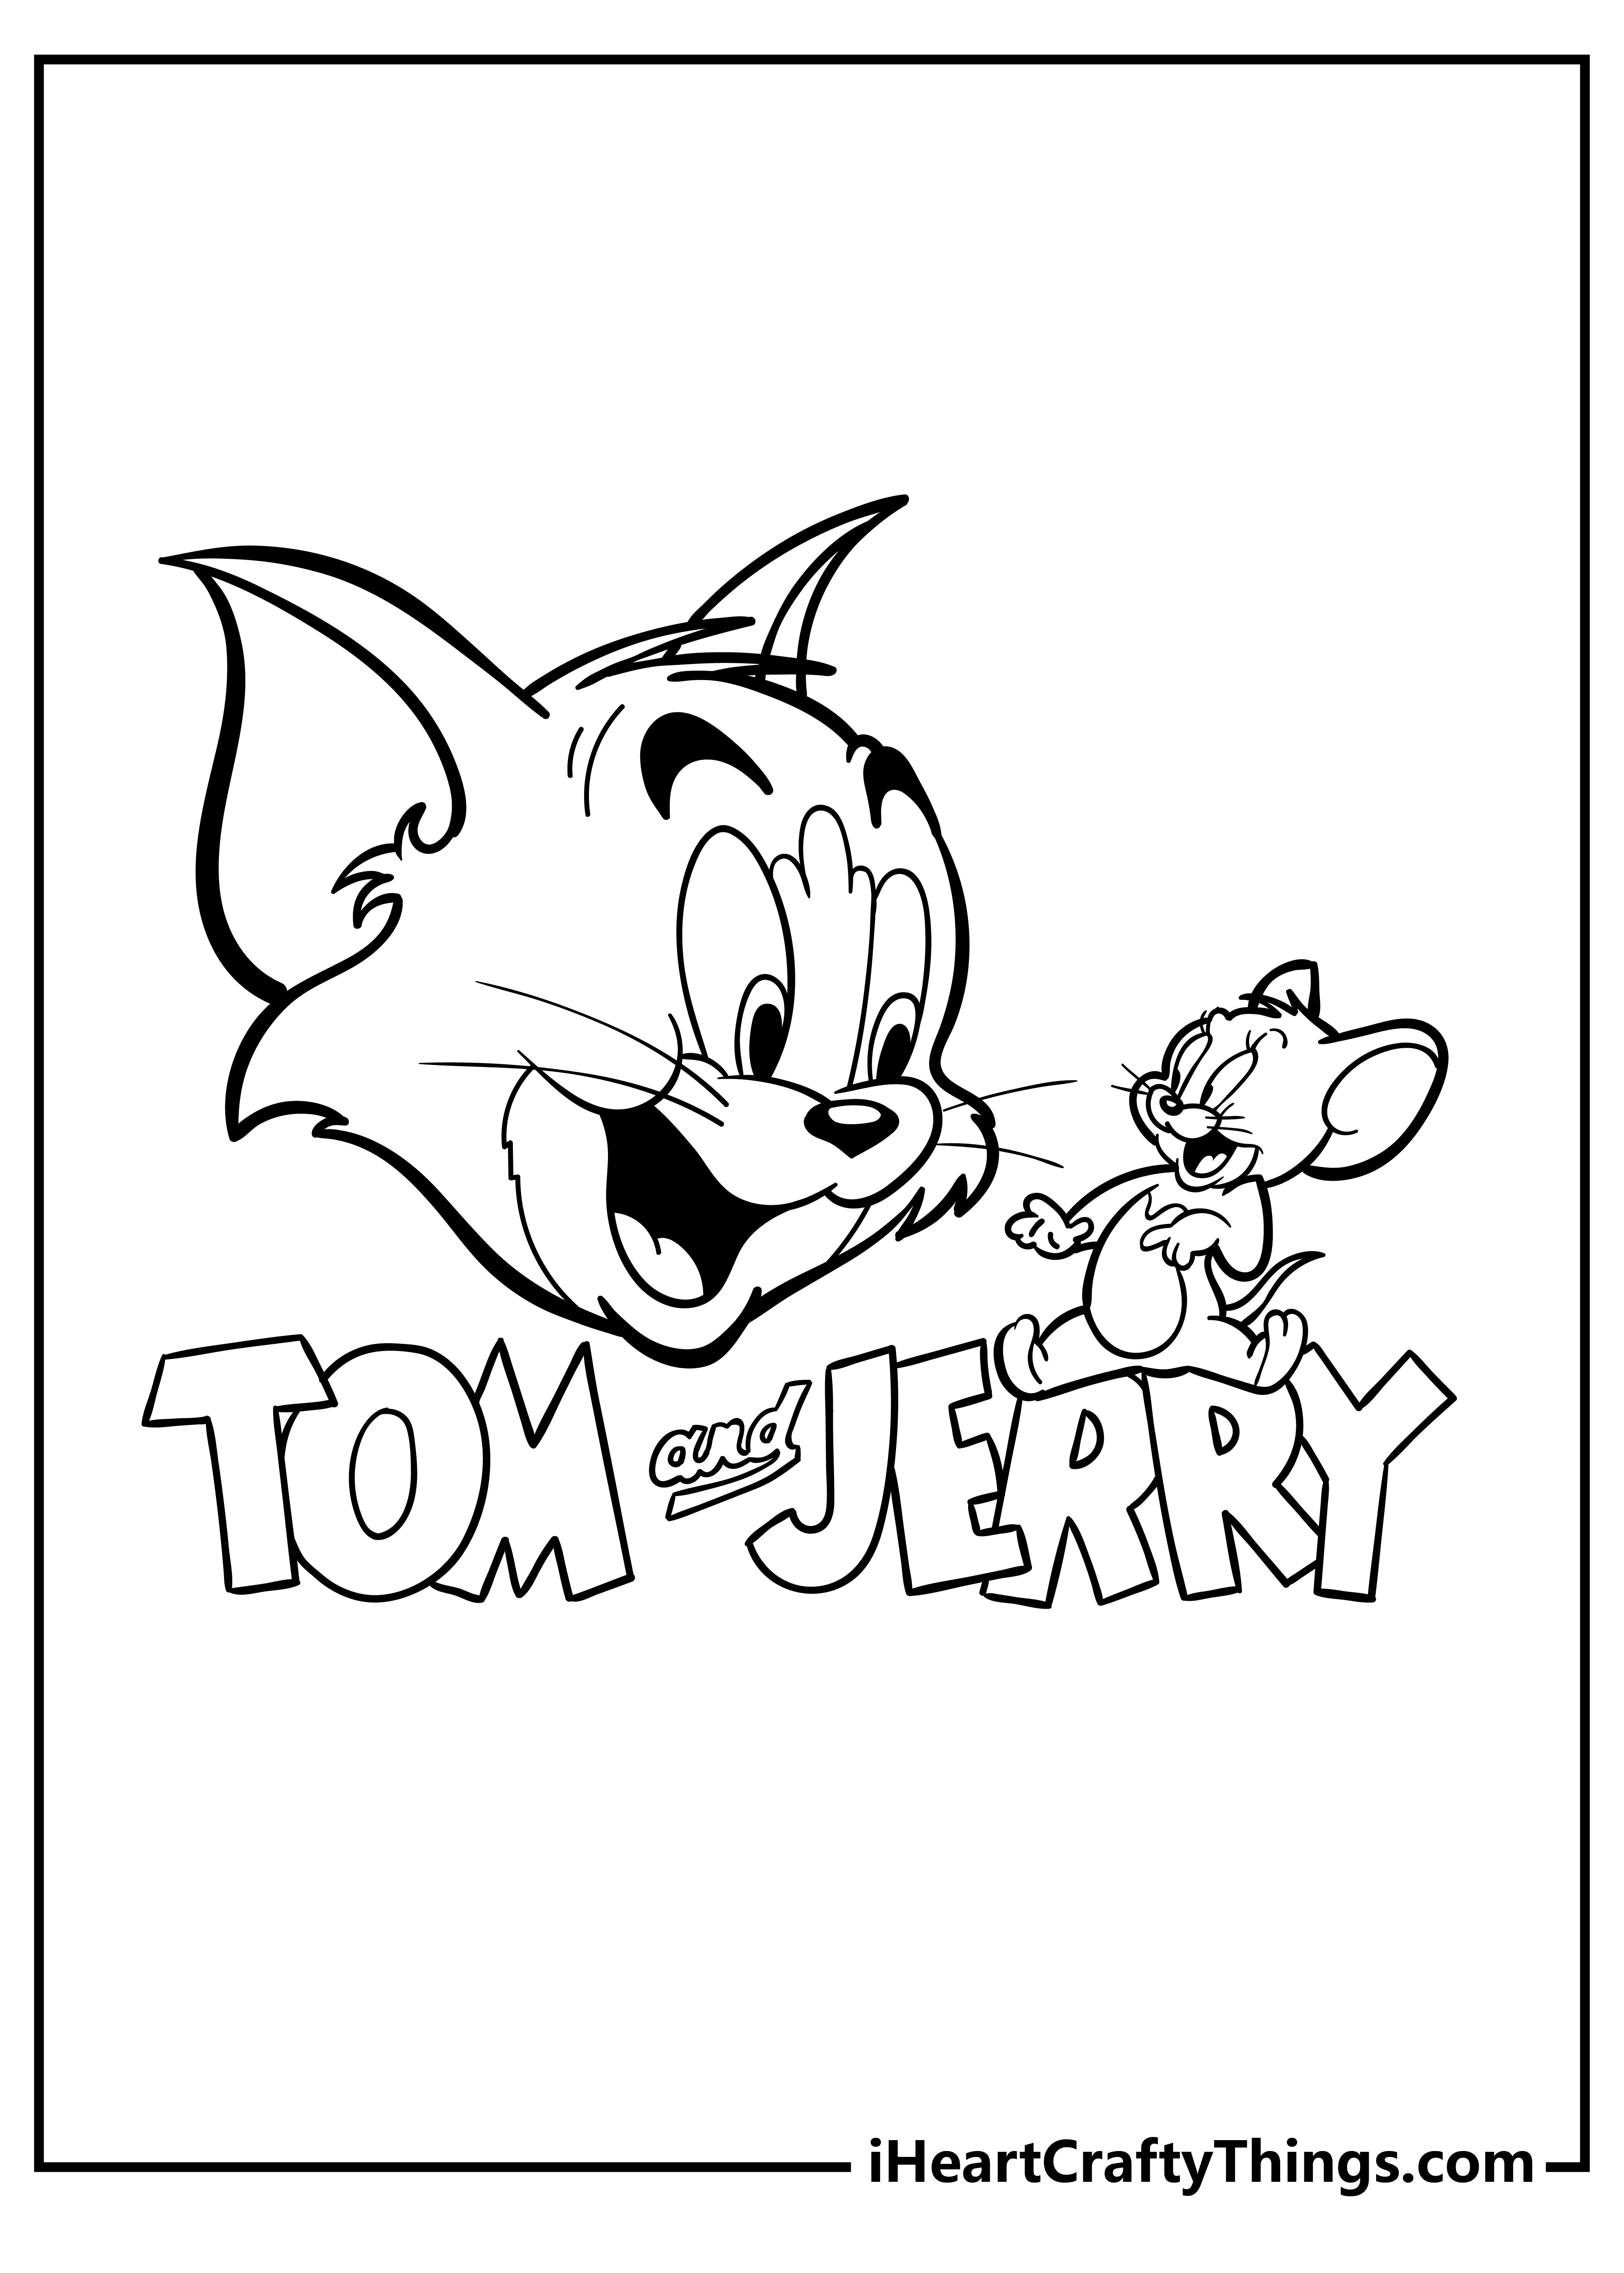 Tom and Jerry Coloring Pages for kids free download